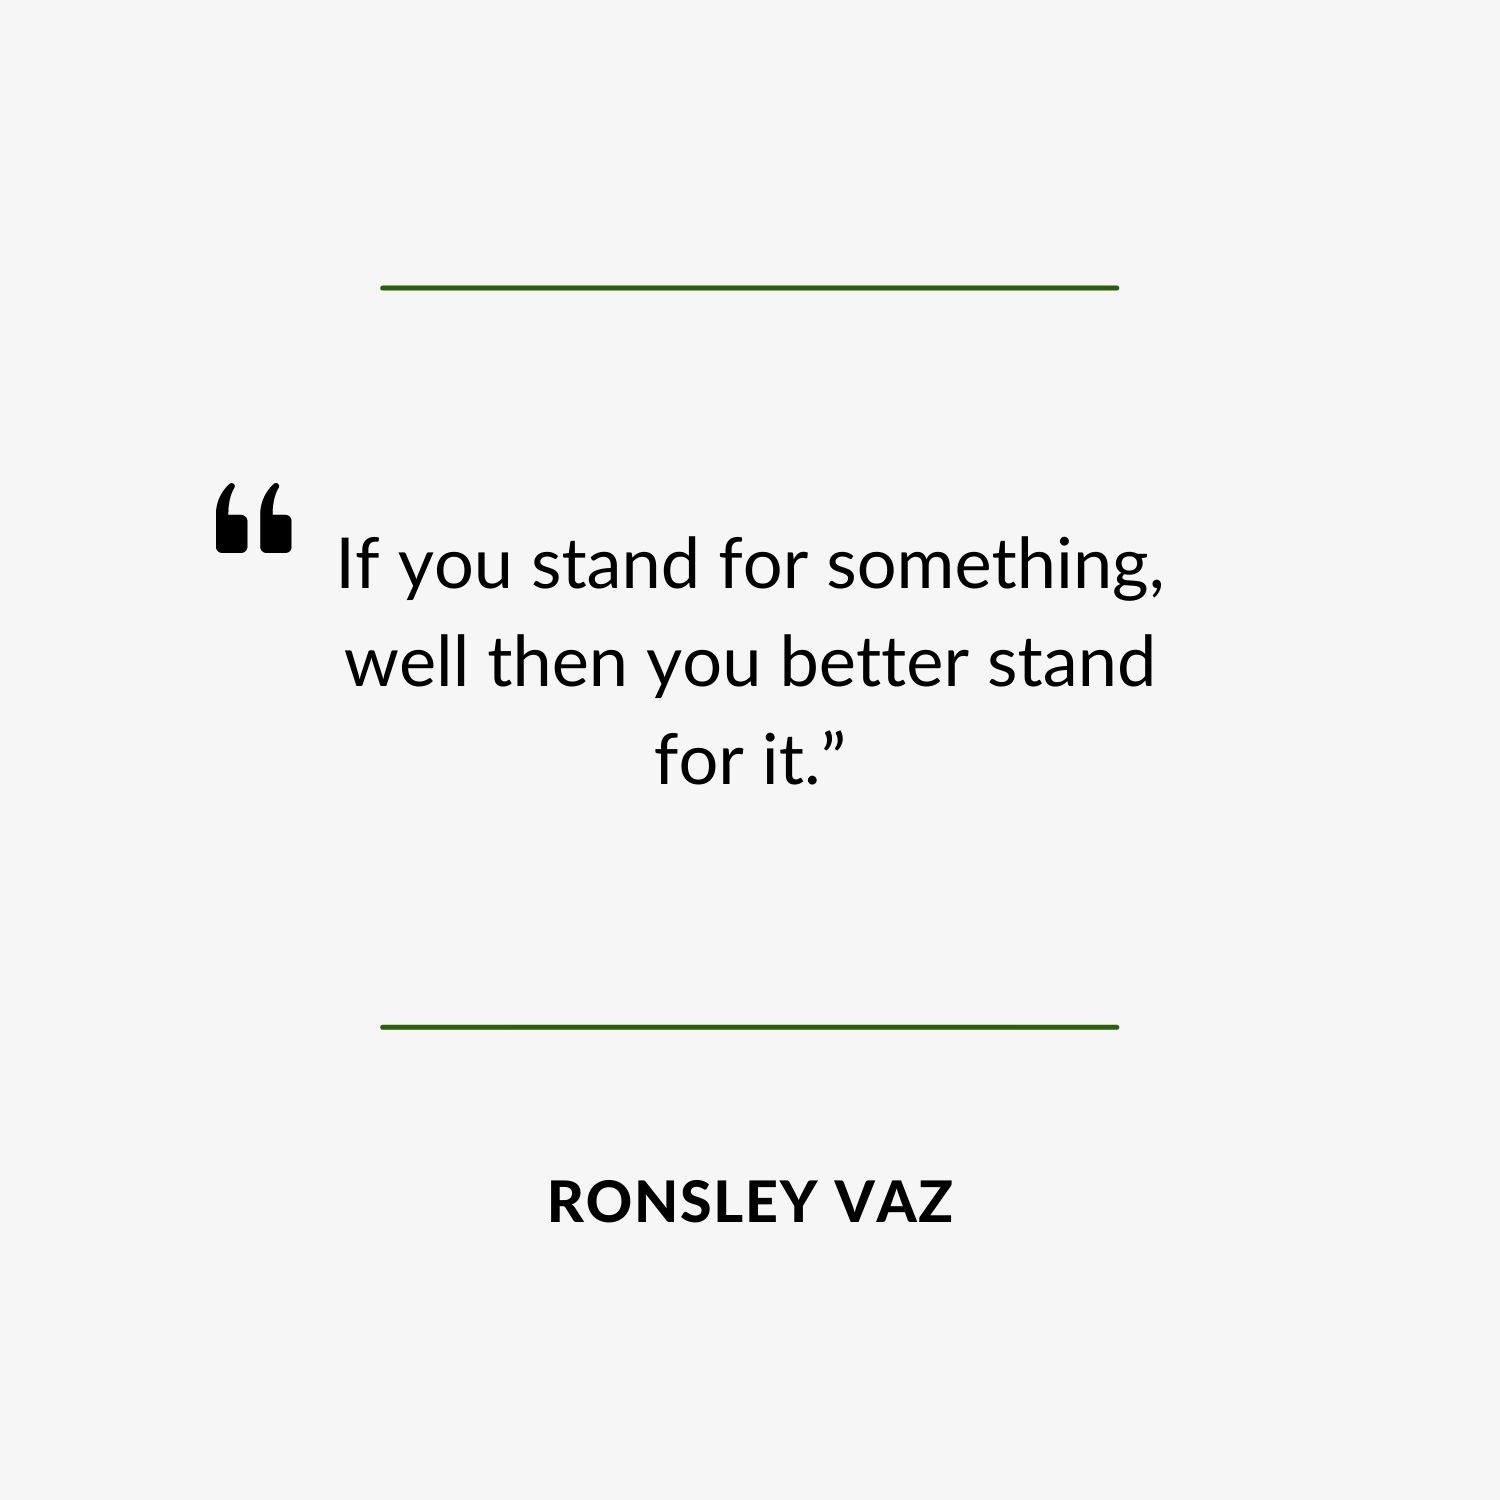 “If you stand for something, well then you better stand for it.”